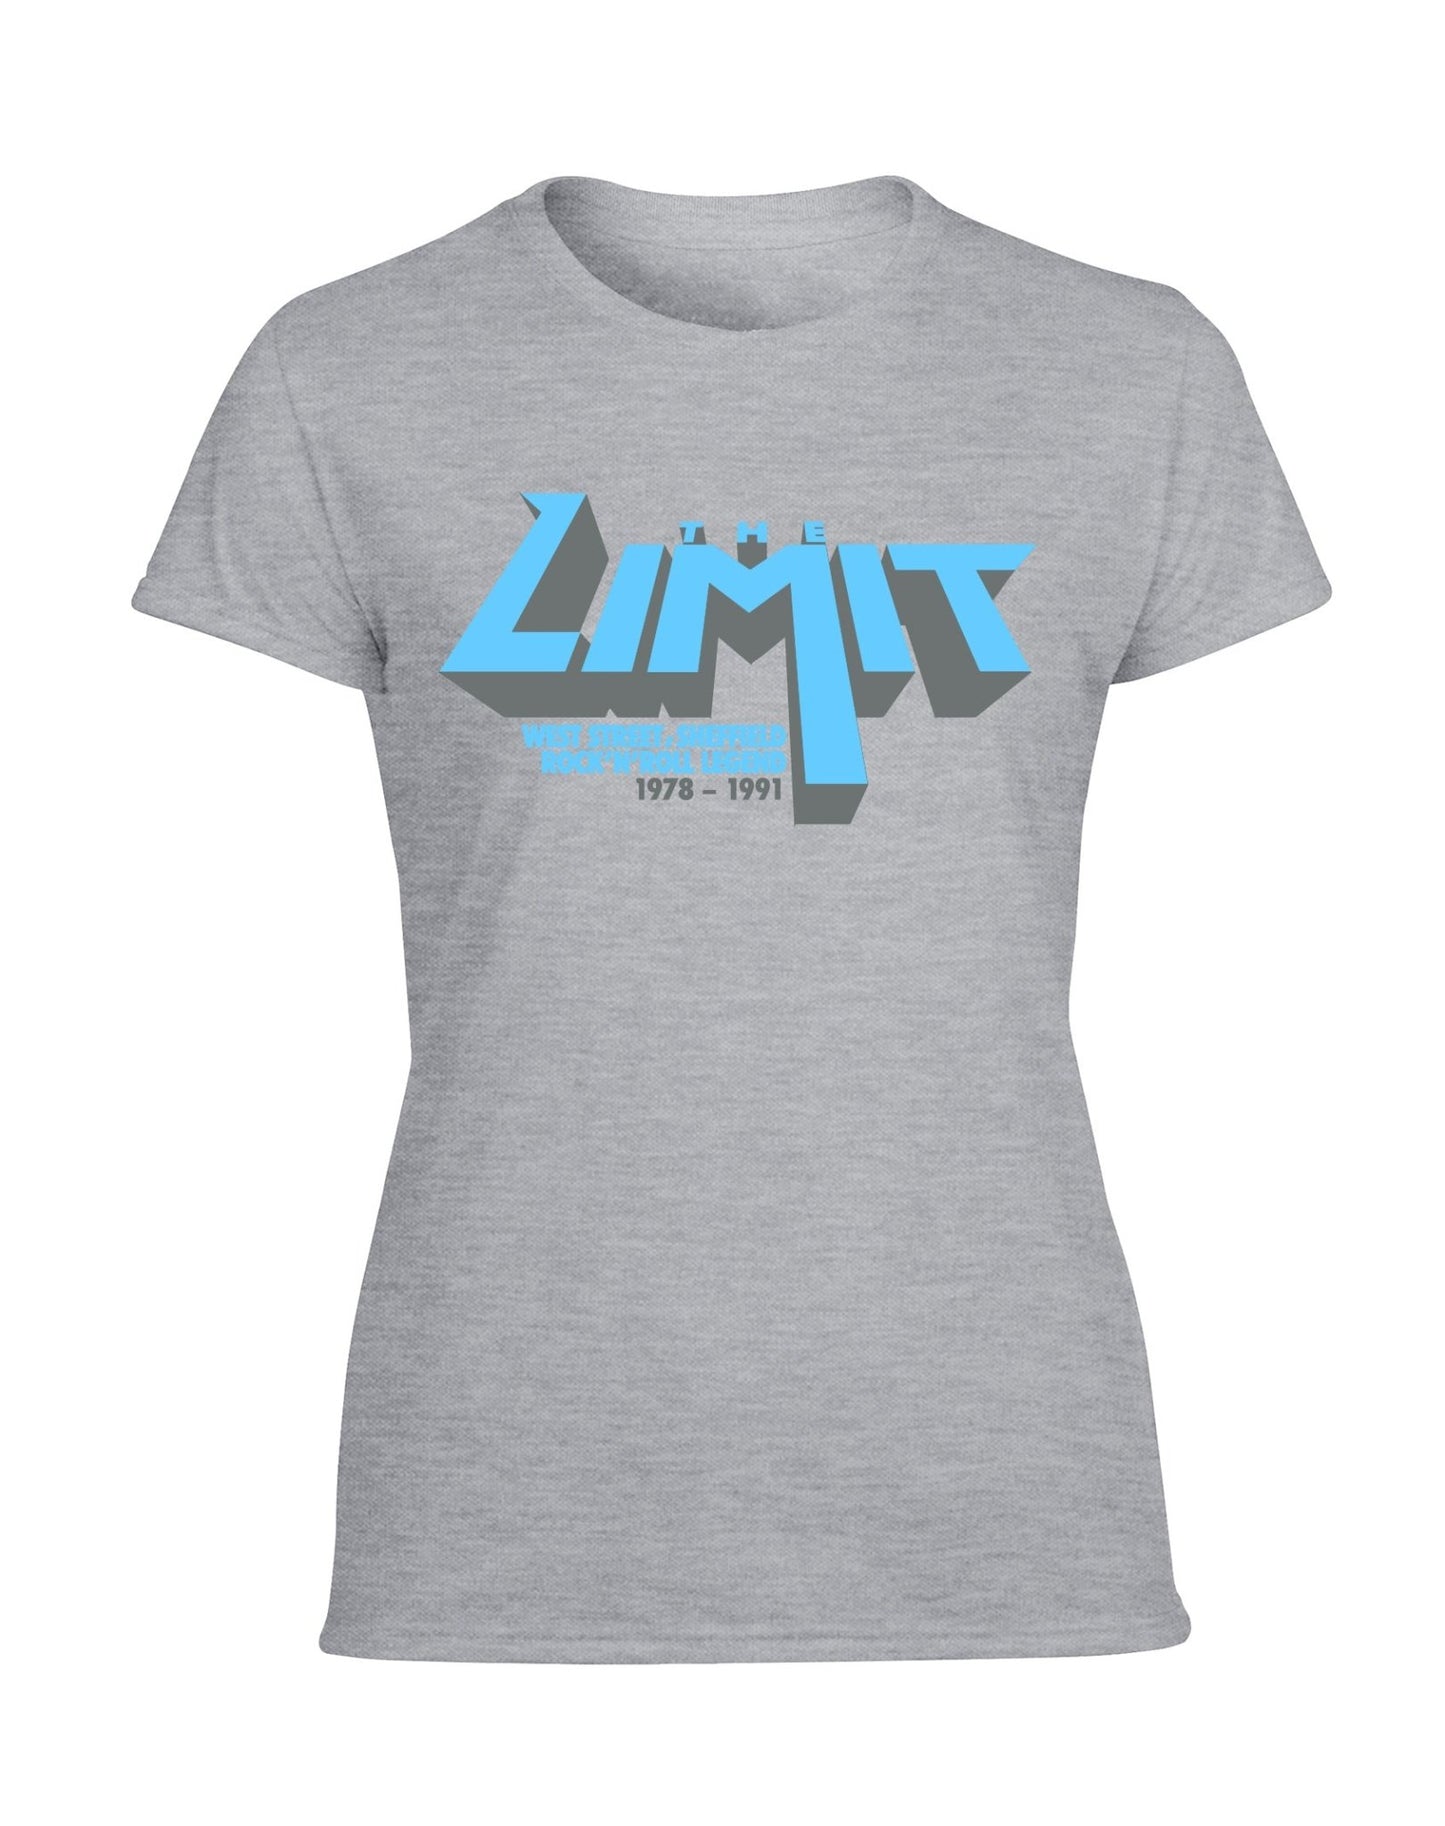 Limit anniversary (blue logo) ladies fit T-shirt - various colours - Dirty Stop Outs